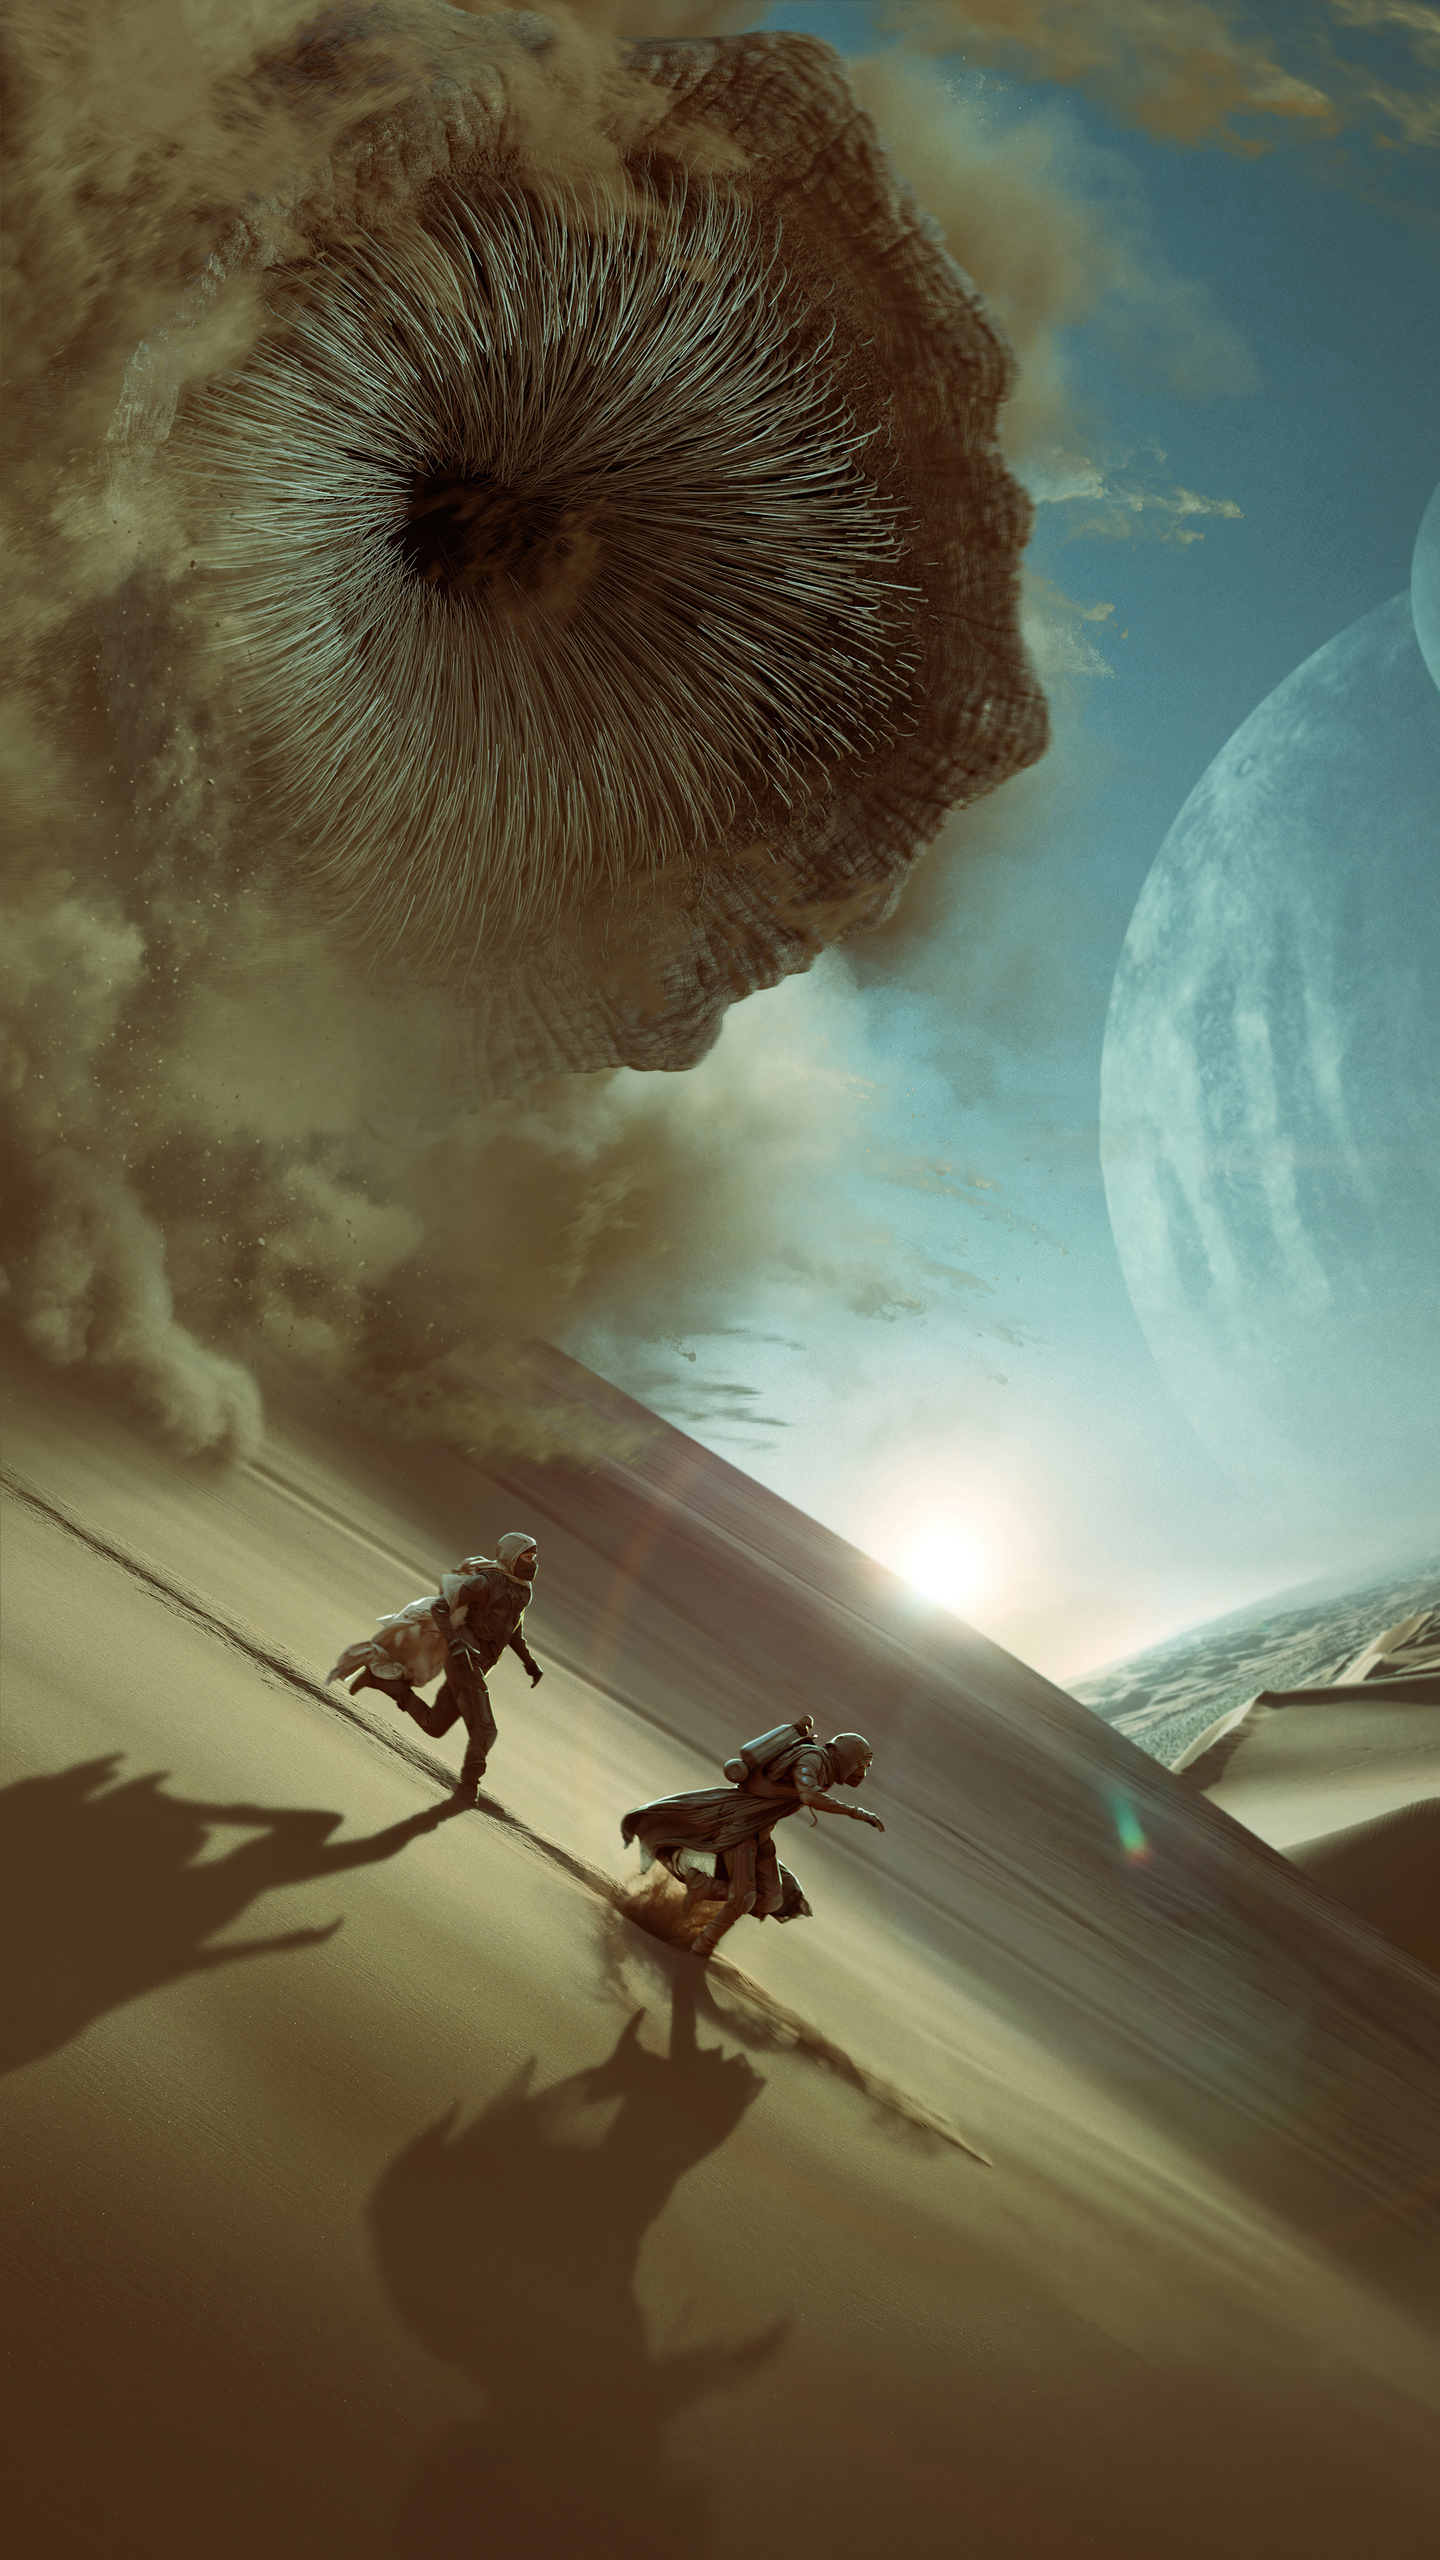 Dune Part 2 wallpaper Resolution 1440x2560 | Best Download this awesome wallpaper - Cool Wallpaper HD - CoolWallpaper-HD.com